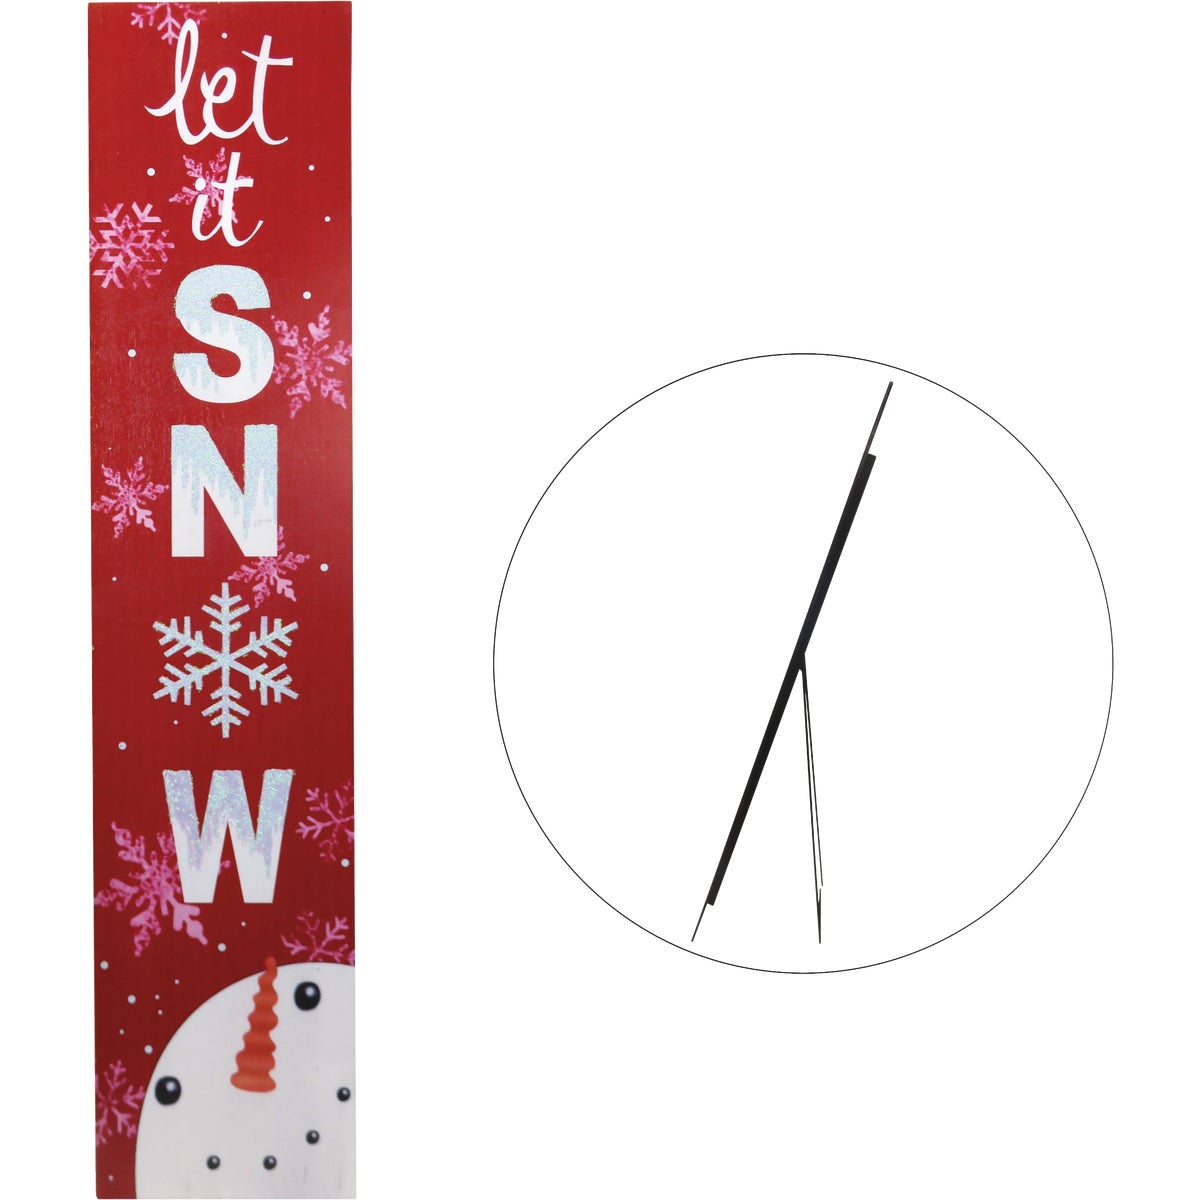 Alpine 1 In. W. x 42 In. H. x 8 In. L. Let It Snow Porch Greeter Sign with Easel